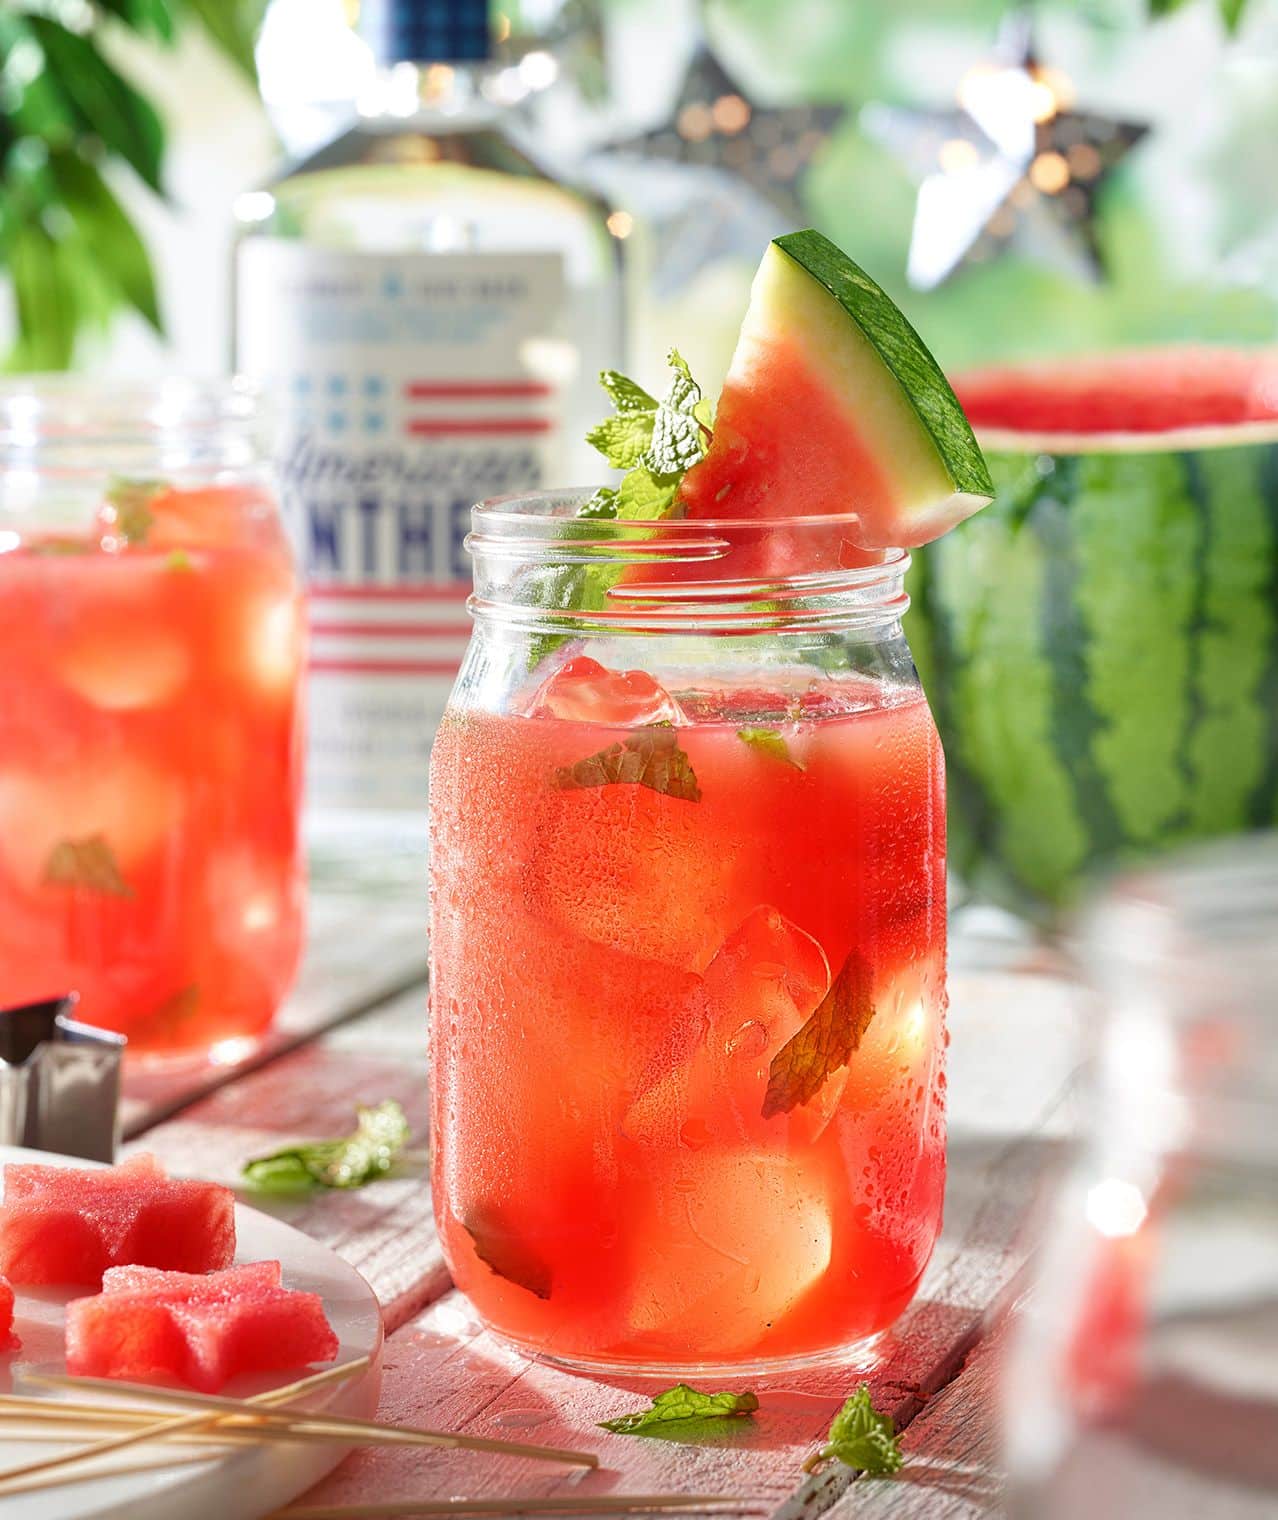 Learn how to make the Watermelon Smash cocktail drink recipe with Vodka ...